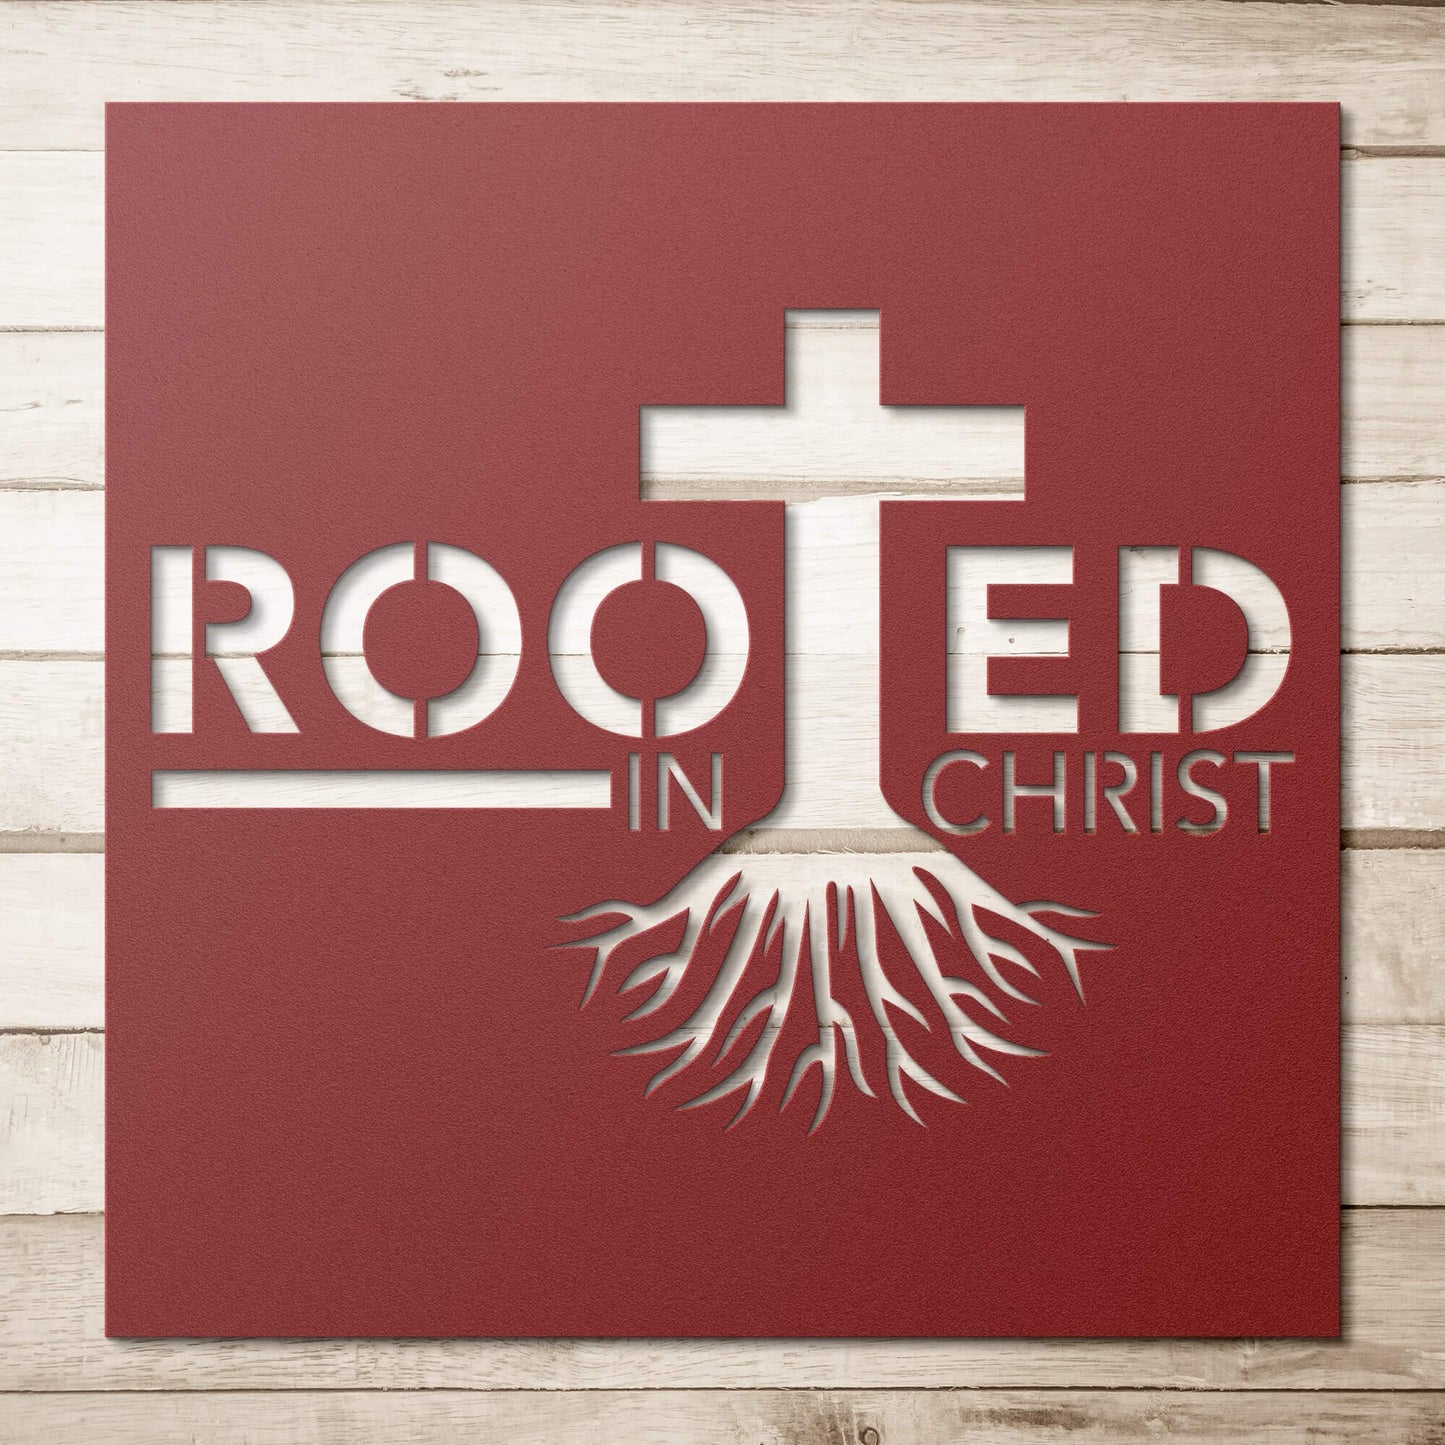 Rooted In Christ Metal Sign - Christian Metal Wall Art - Religious Metal Wall Decor